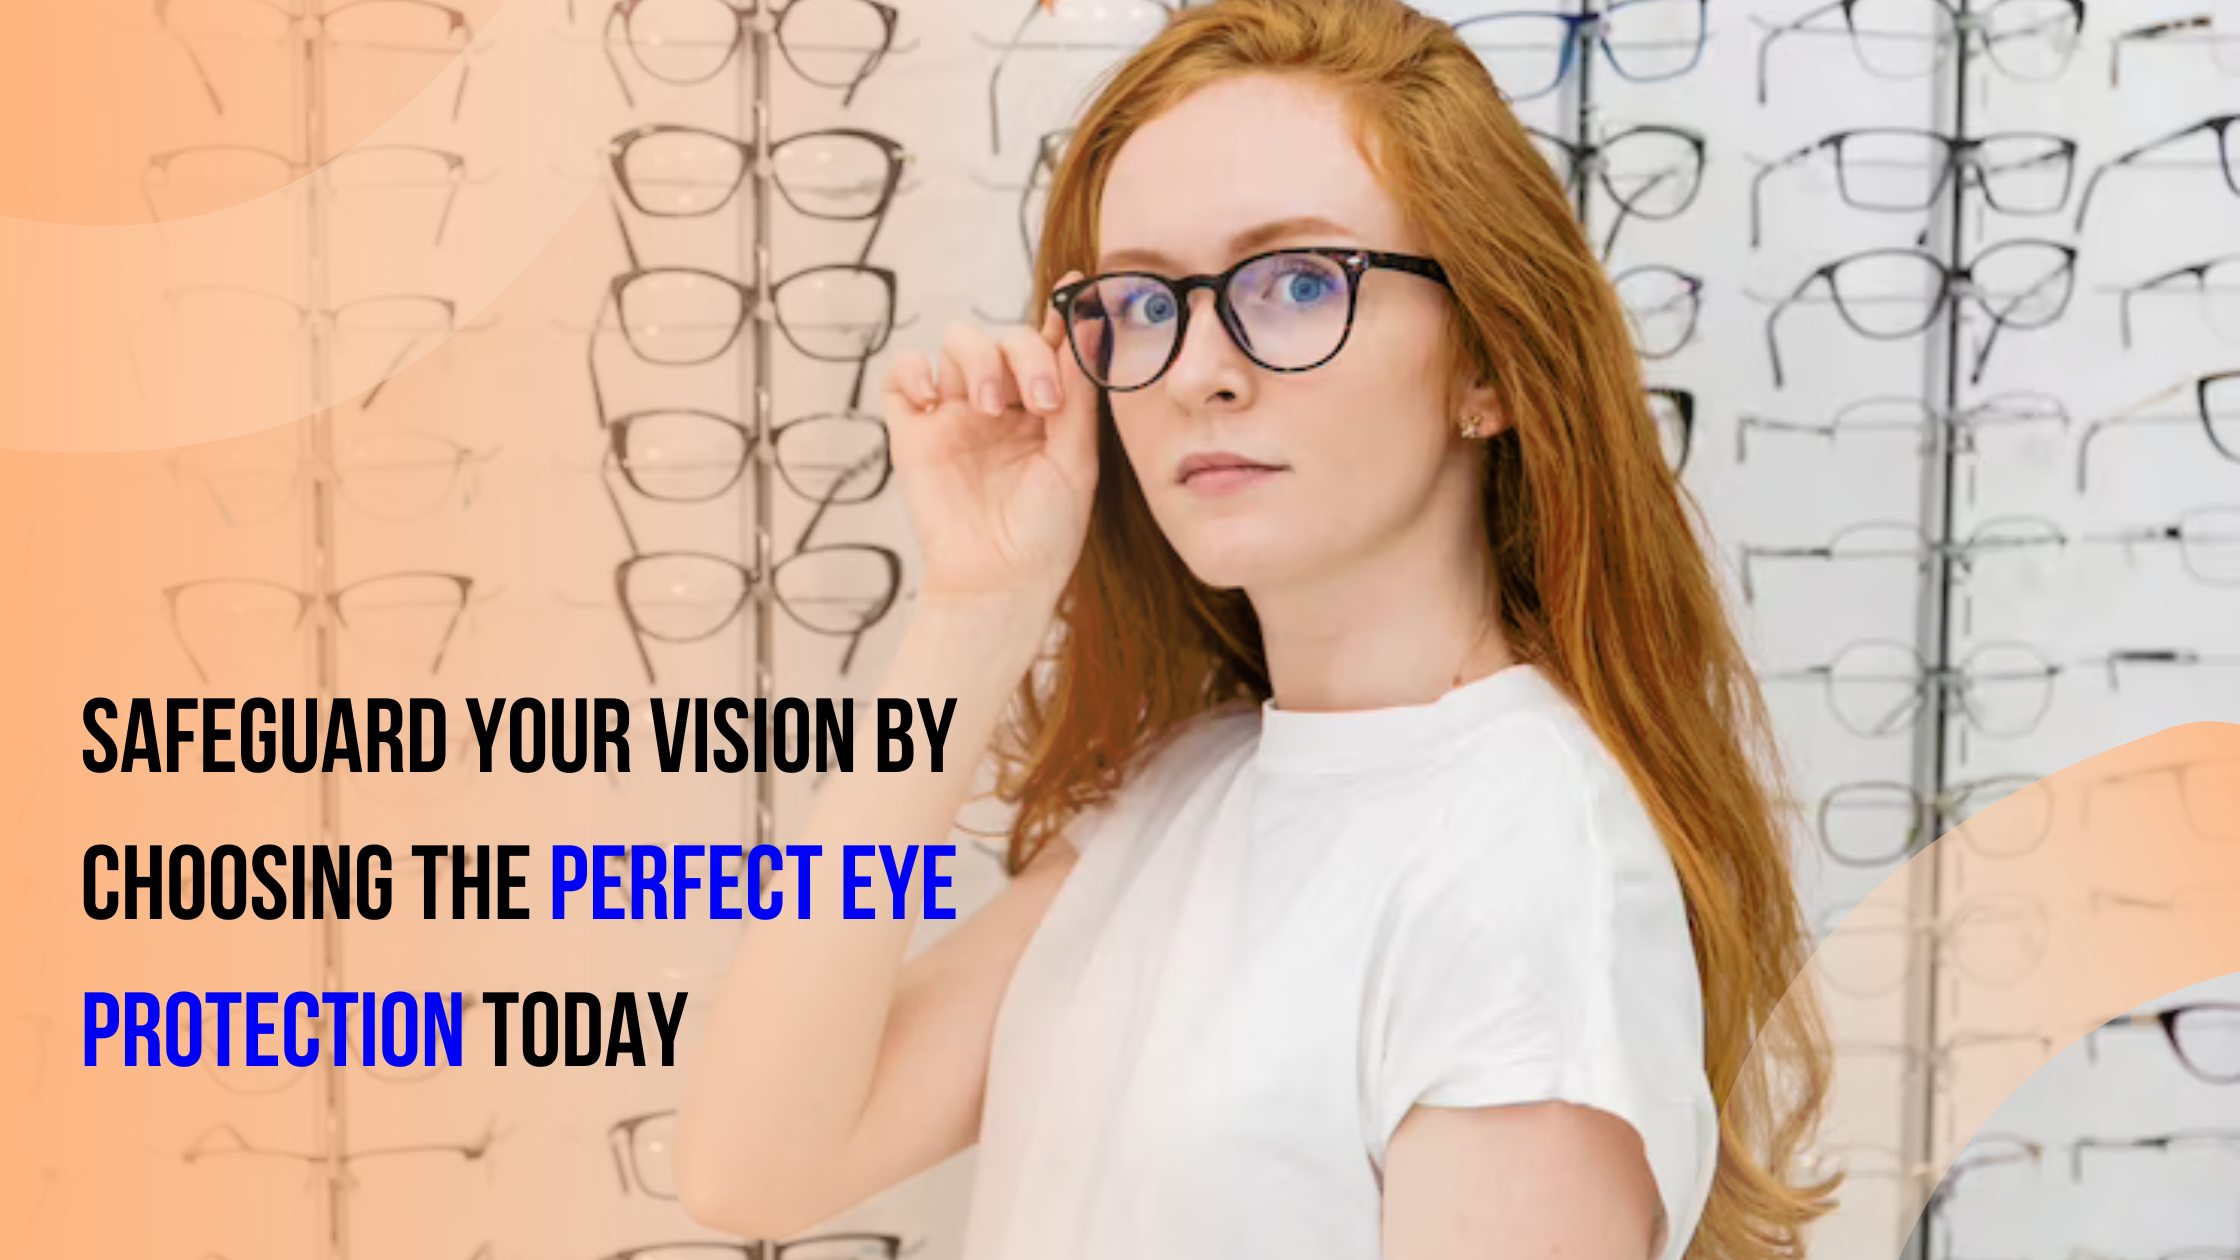 Safeguard Your Vision by Choosing the Perfect Eye Protection Today